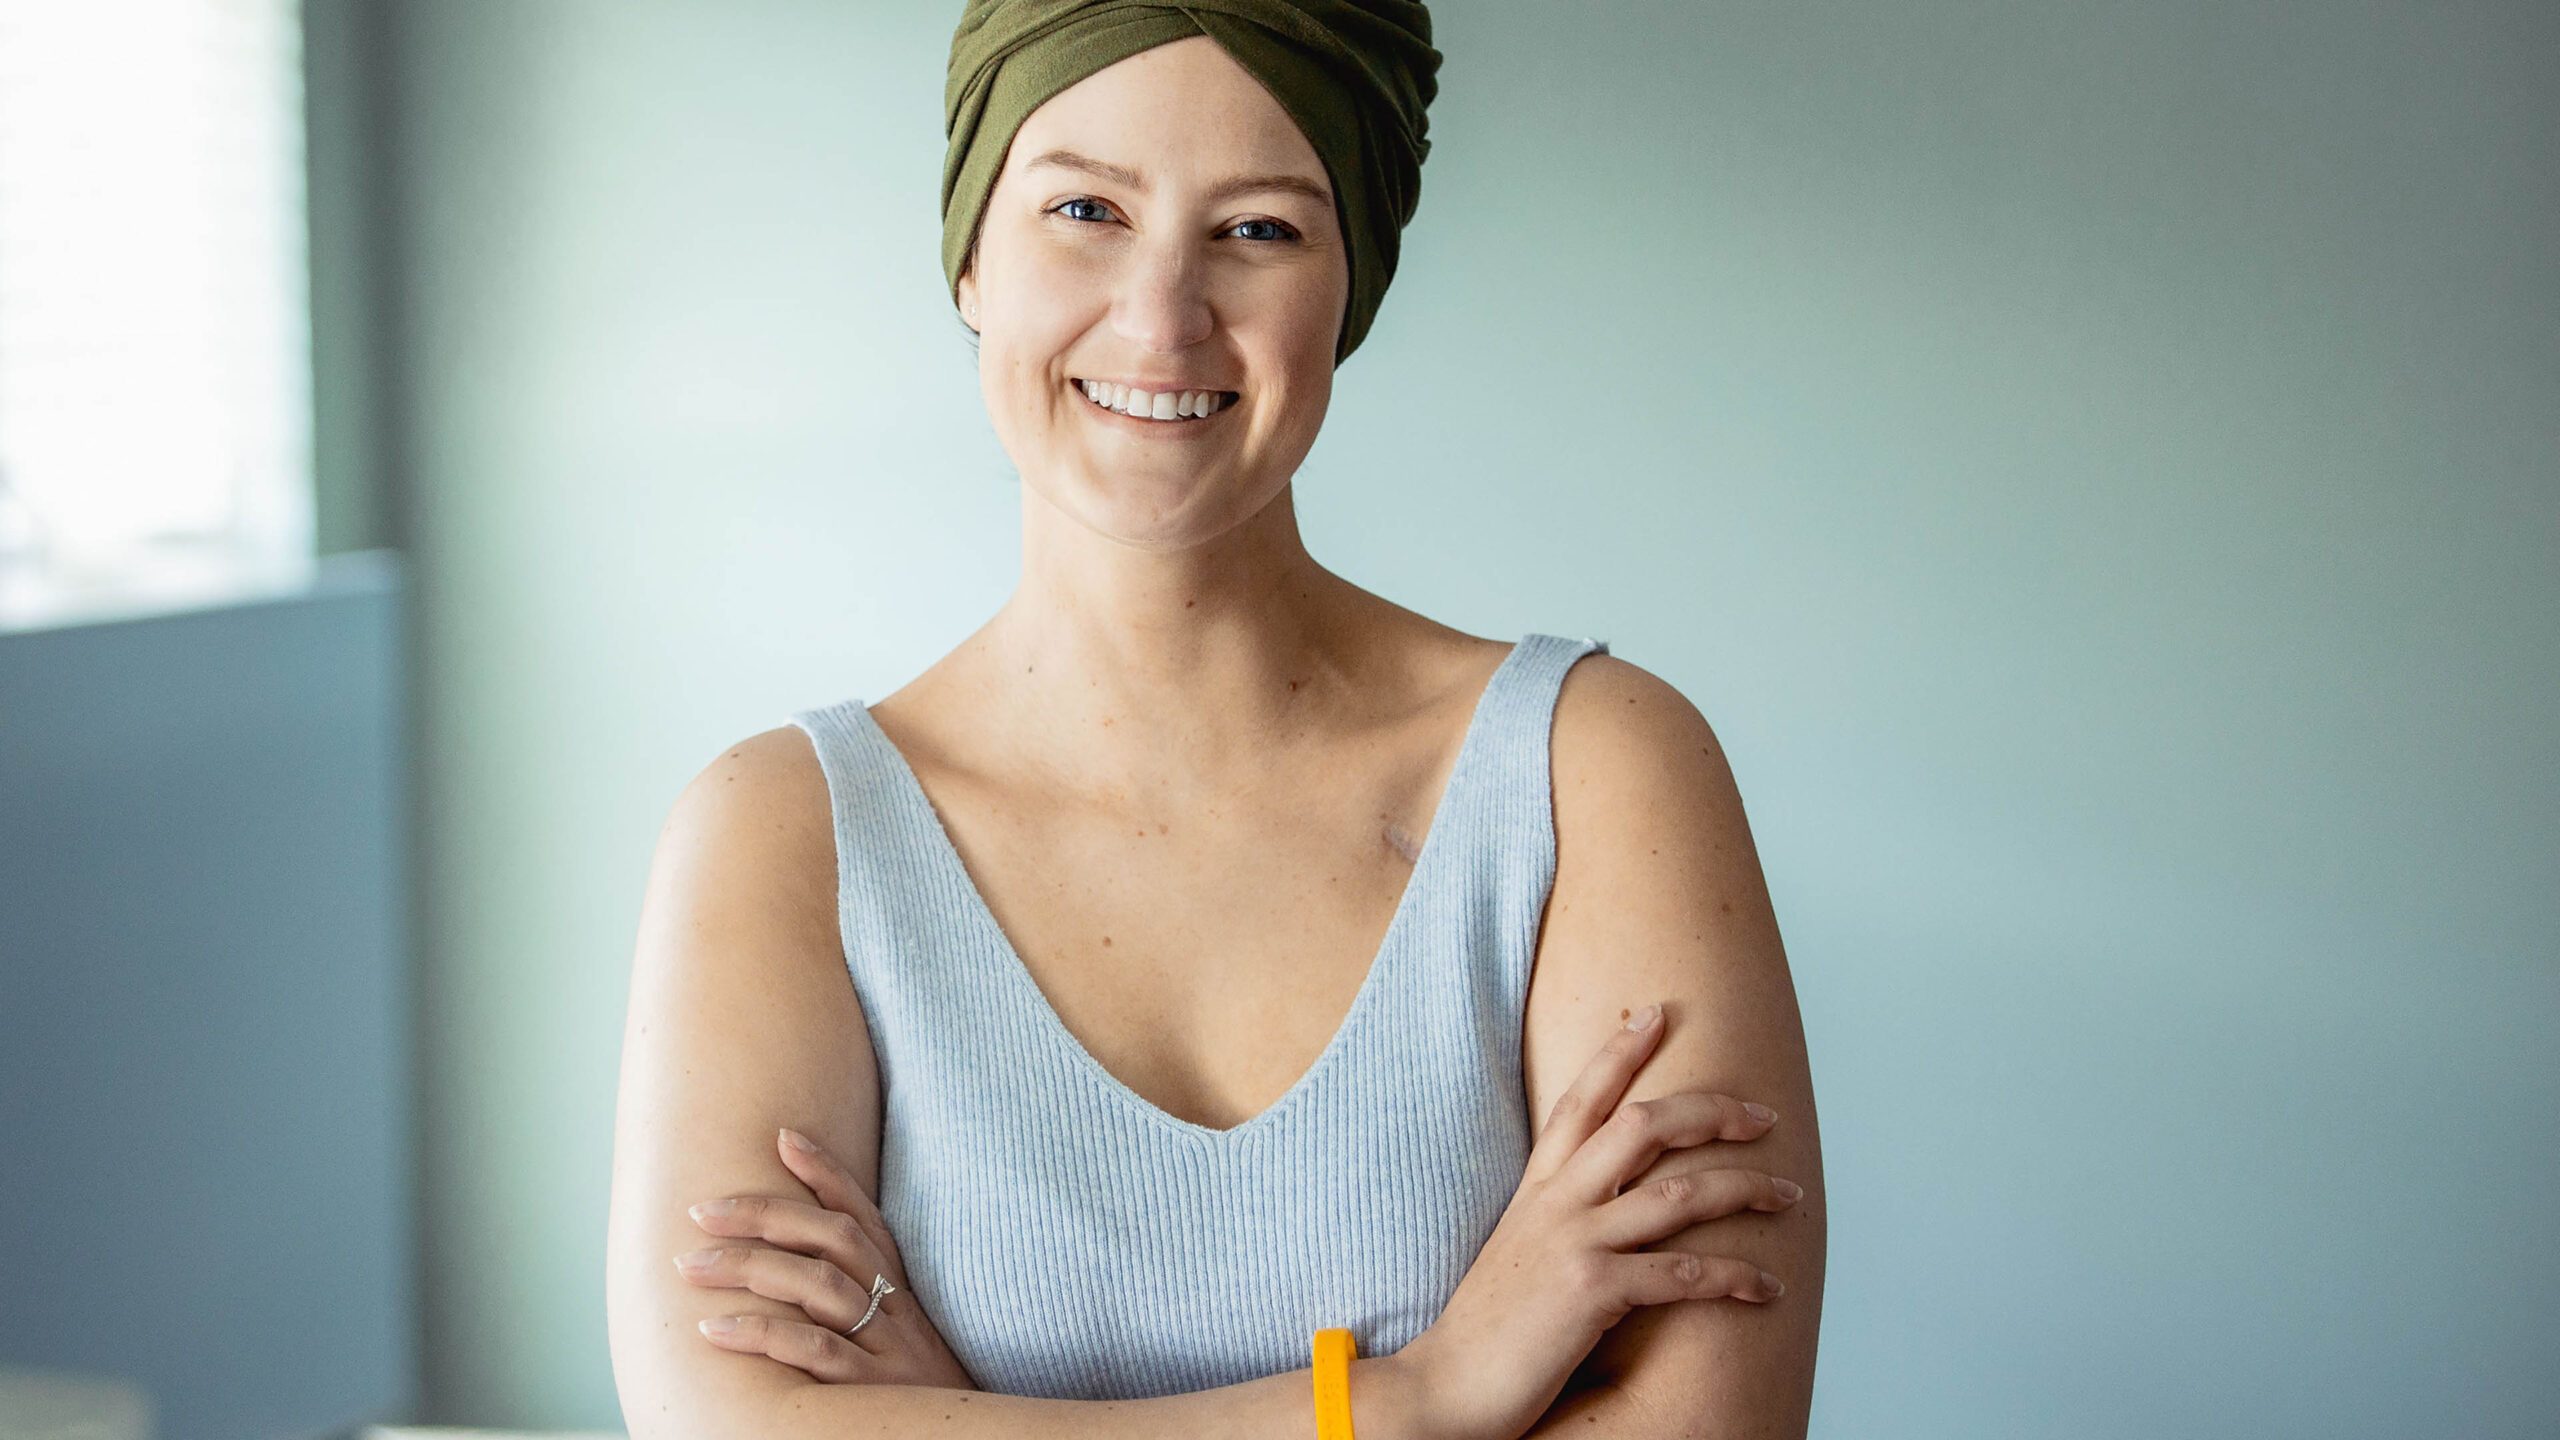 A smiling cancer survivor wearing a green head wrap and Livestrong wristband